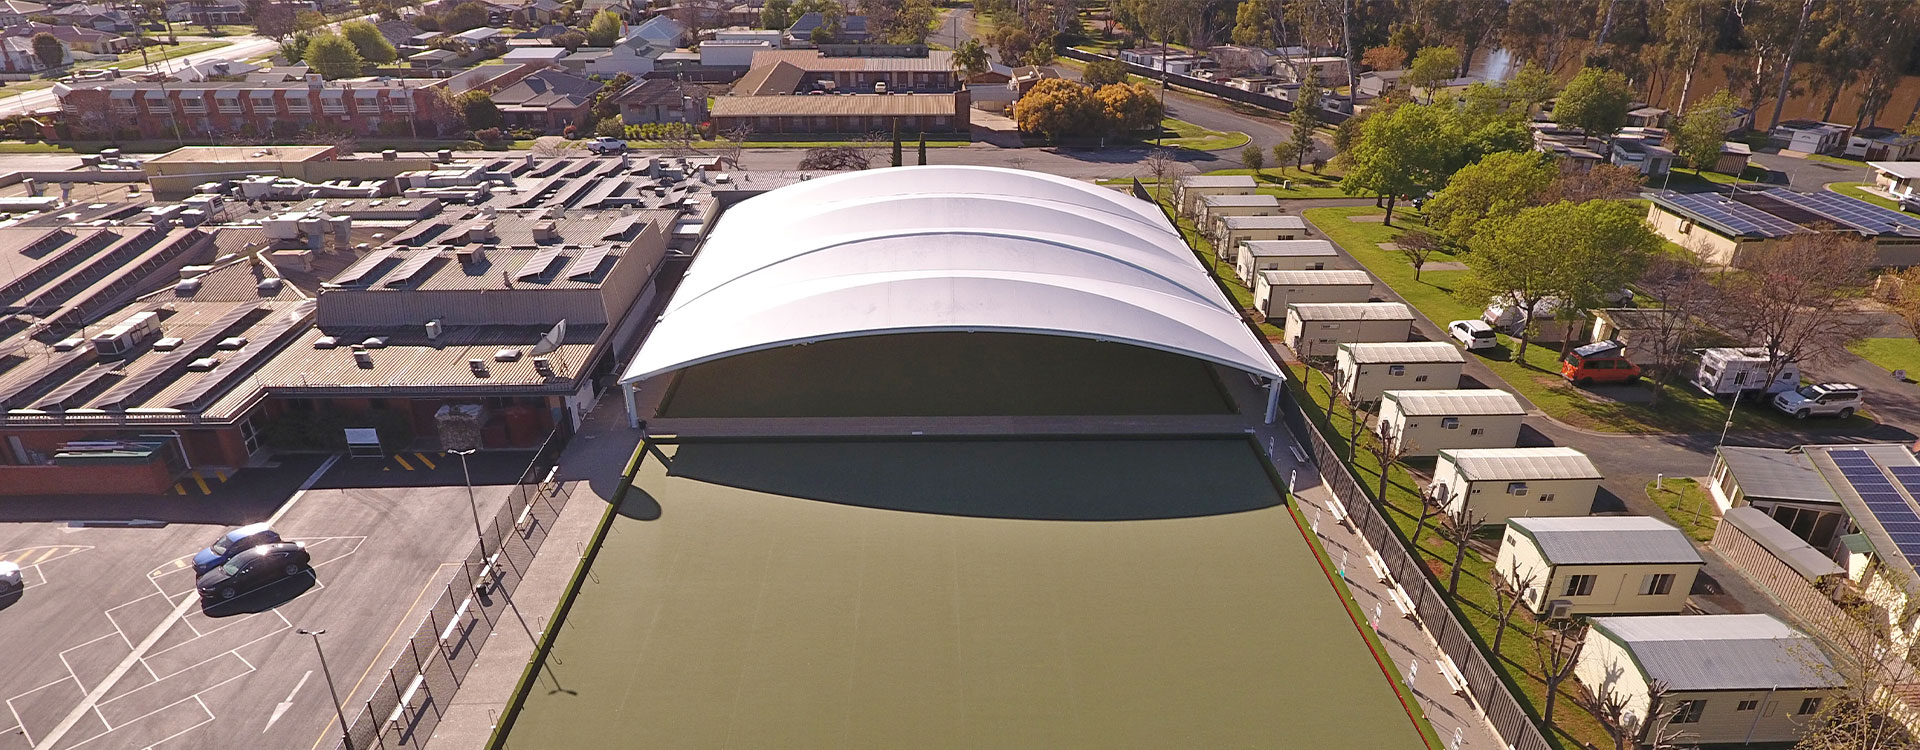 3 Reasons Your Club Needs A Canopy